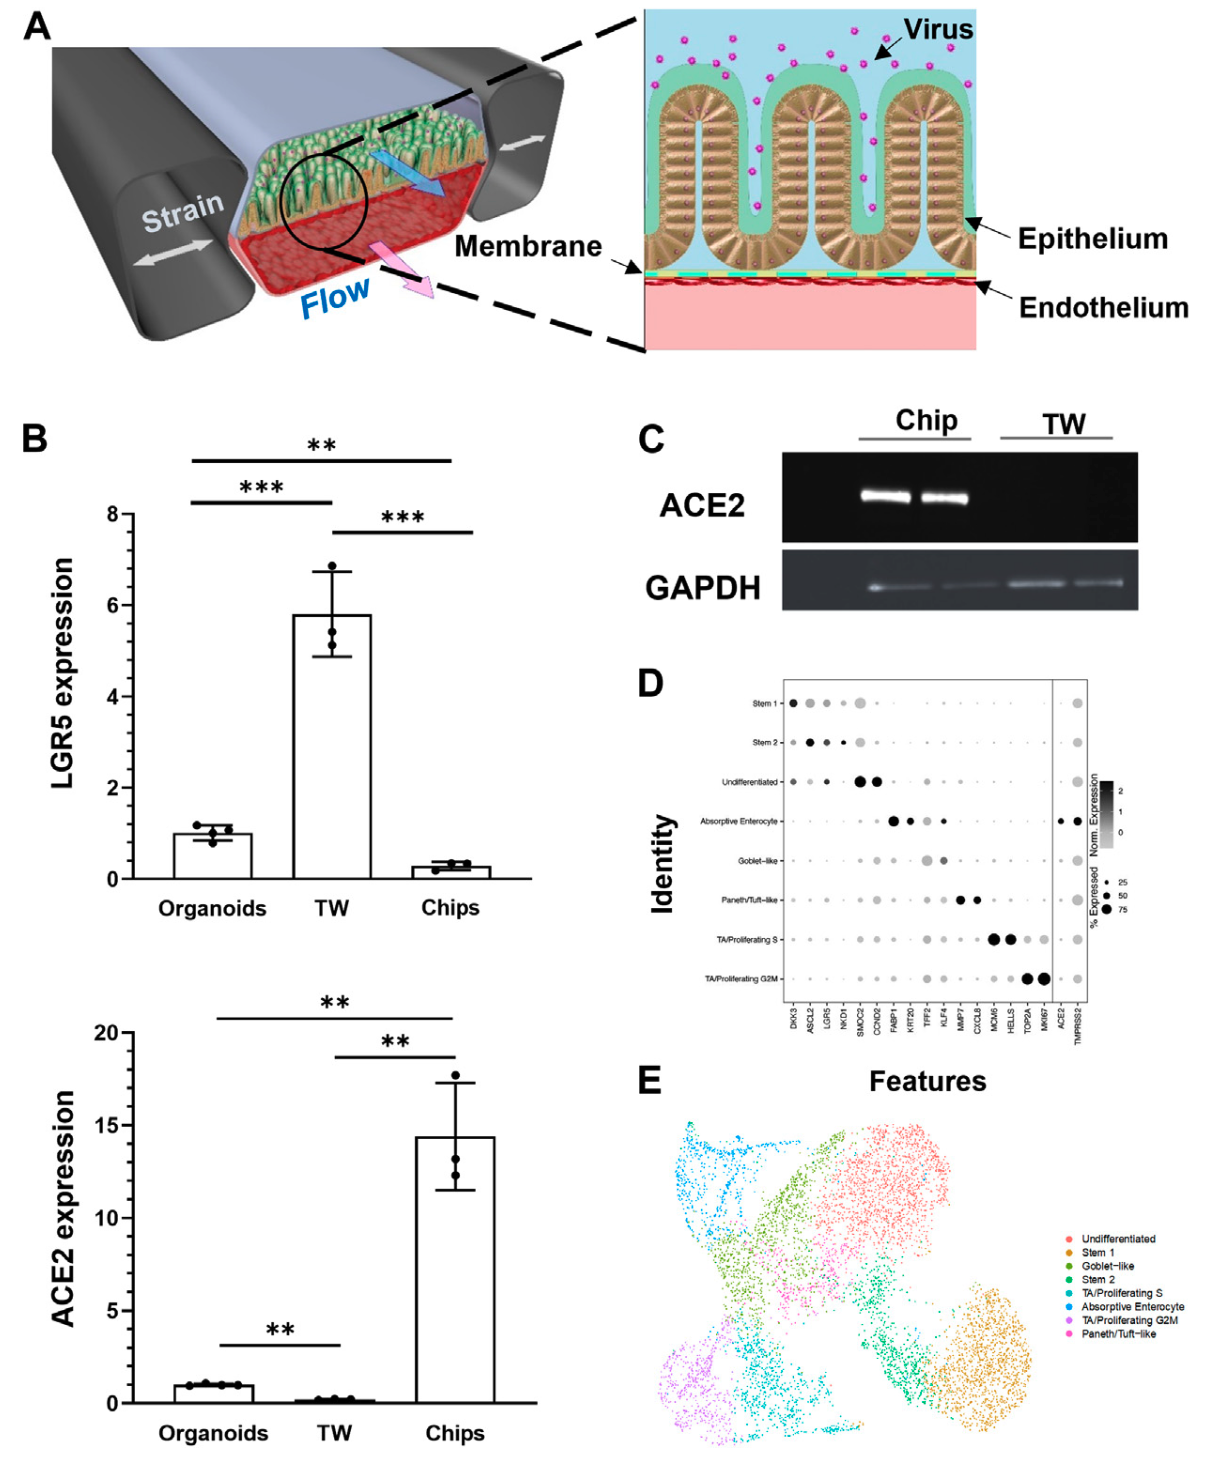 Enteric Coronavirus Infection and Treatment Modeled With an Immunocompetent Human Intestine-On-A-Chip